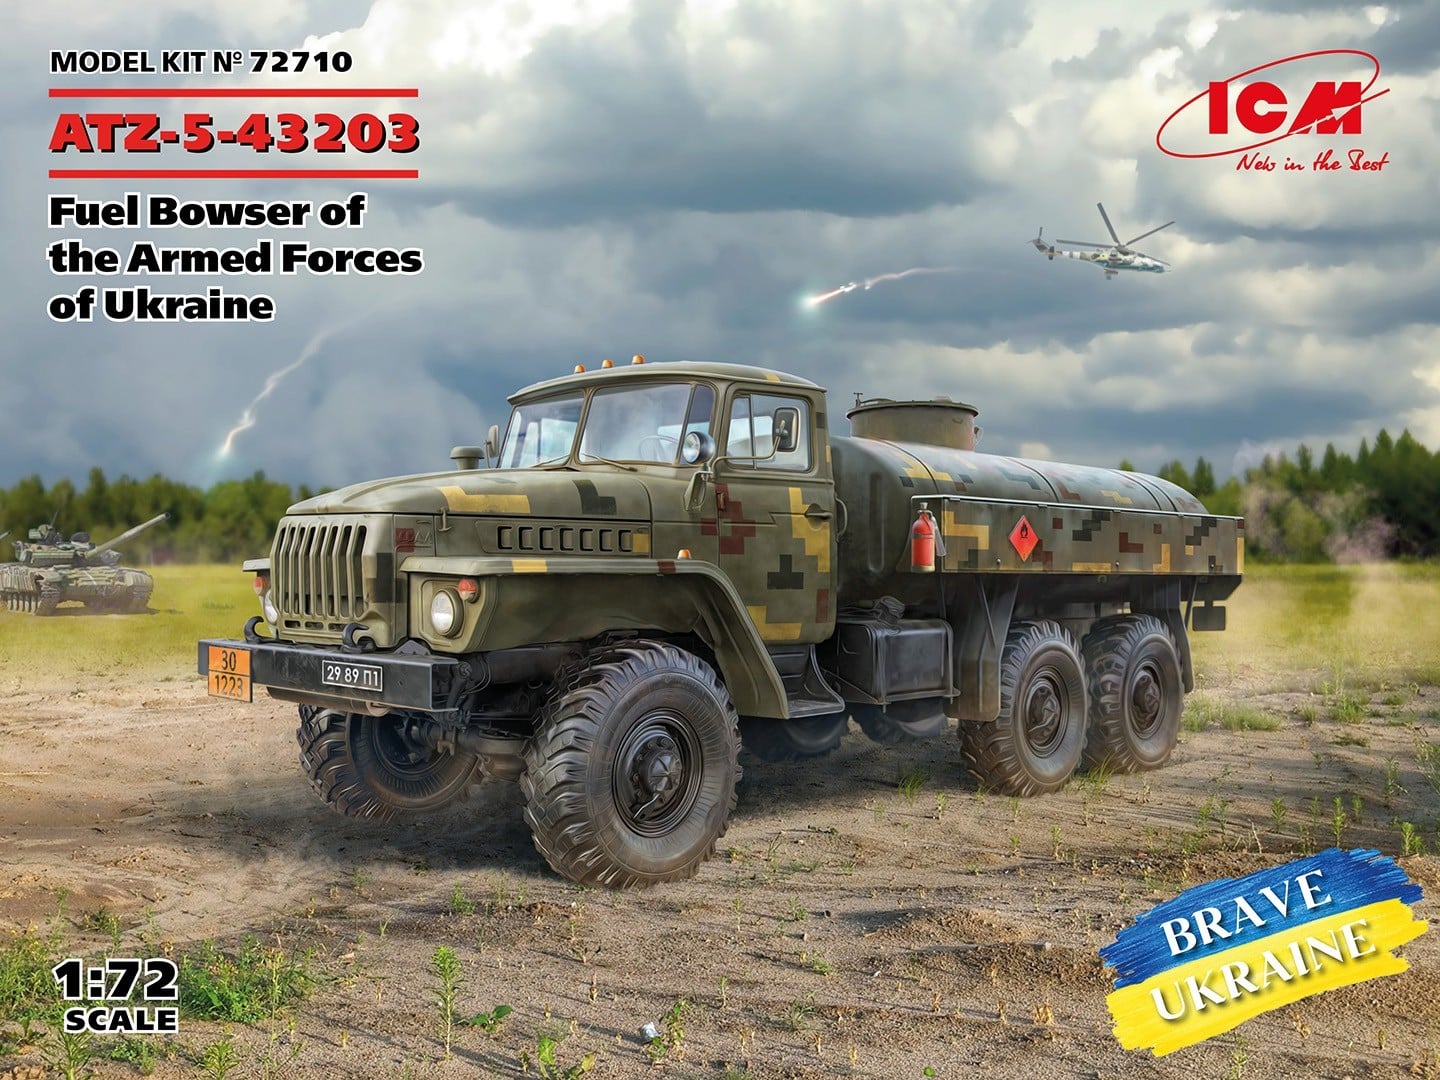 ICM SOON ON SALE! ATZ-5-43203 Fuel Bowser of the Armed Forces of Ukraine